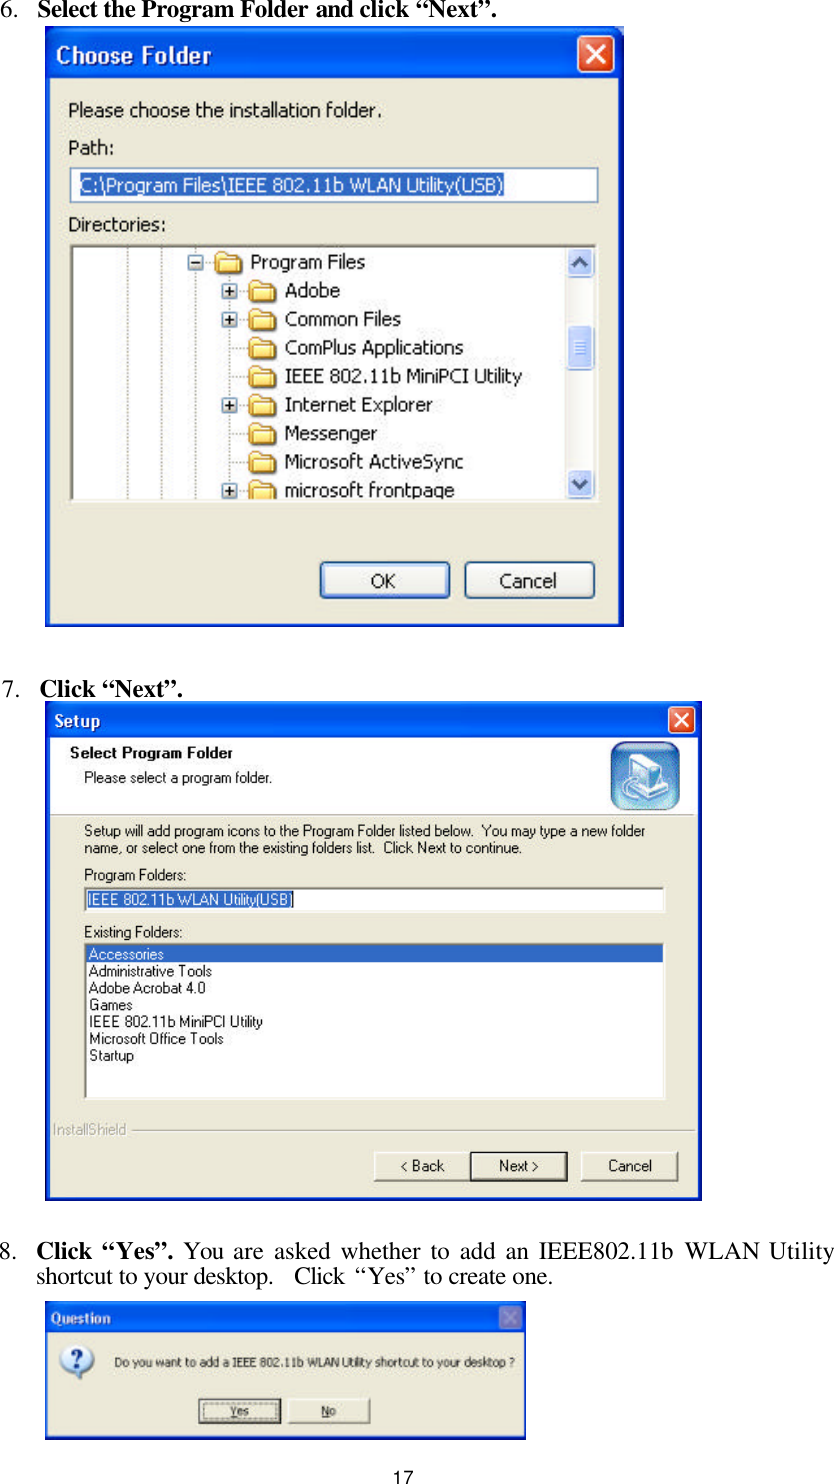  17 6.  Select the Program Folder and click “Next”.                    7.  Click “Next”.               8.  Click “Yes”. You  are asked whether to add an IEEE802.11b WLAN Utility shortcut to your desktop.  Click “Yes” to create one.     